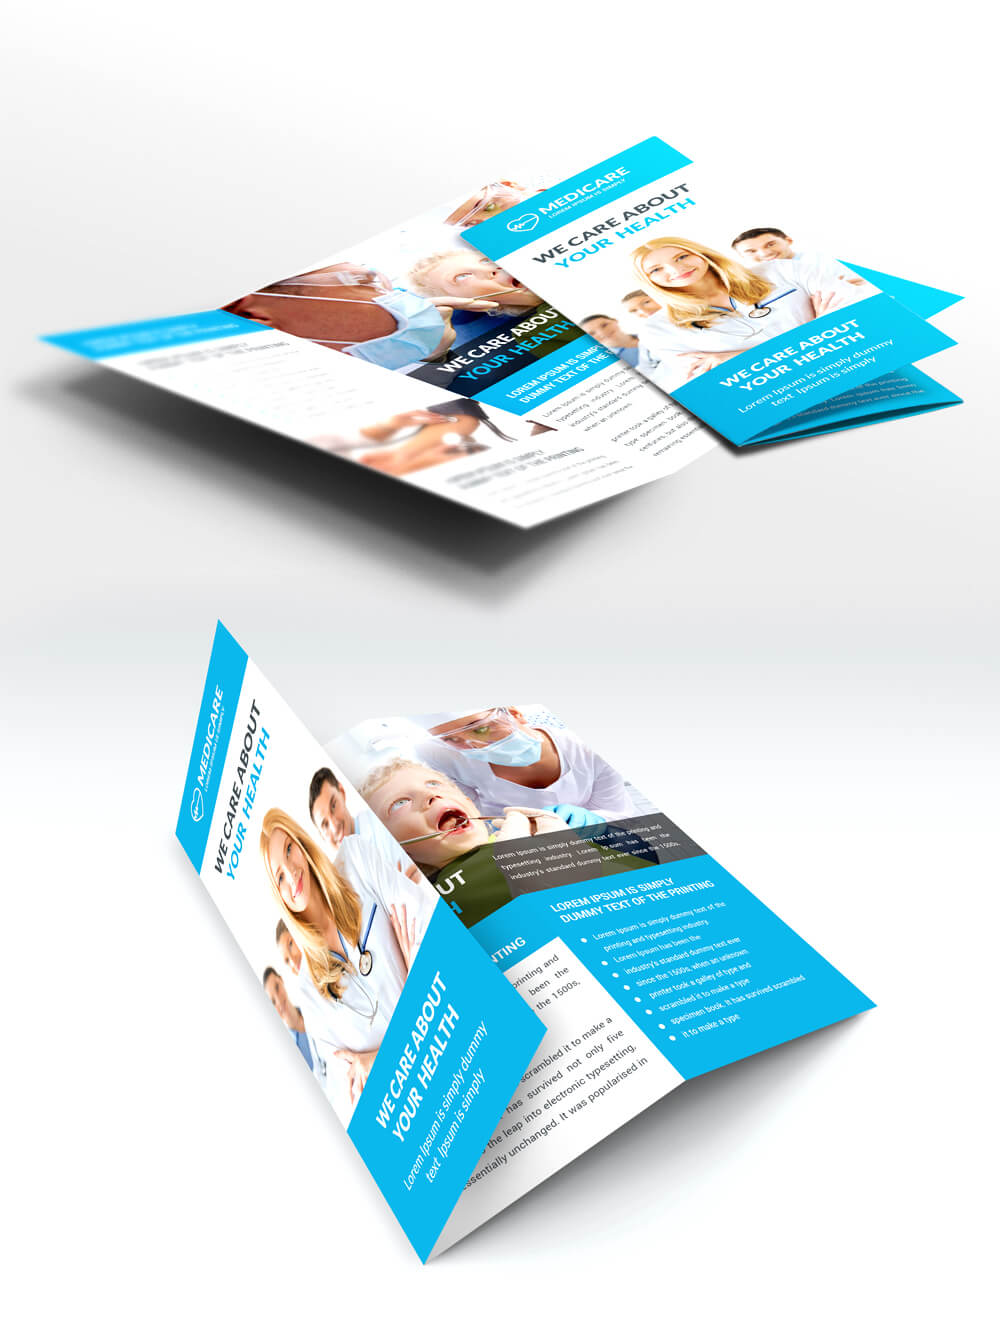 Medical Care And Hospital Trifold Brochure Template Free Psd In Pharmacy Brochure Template Free